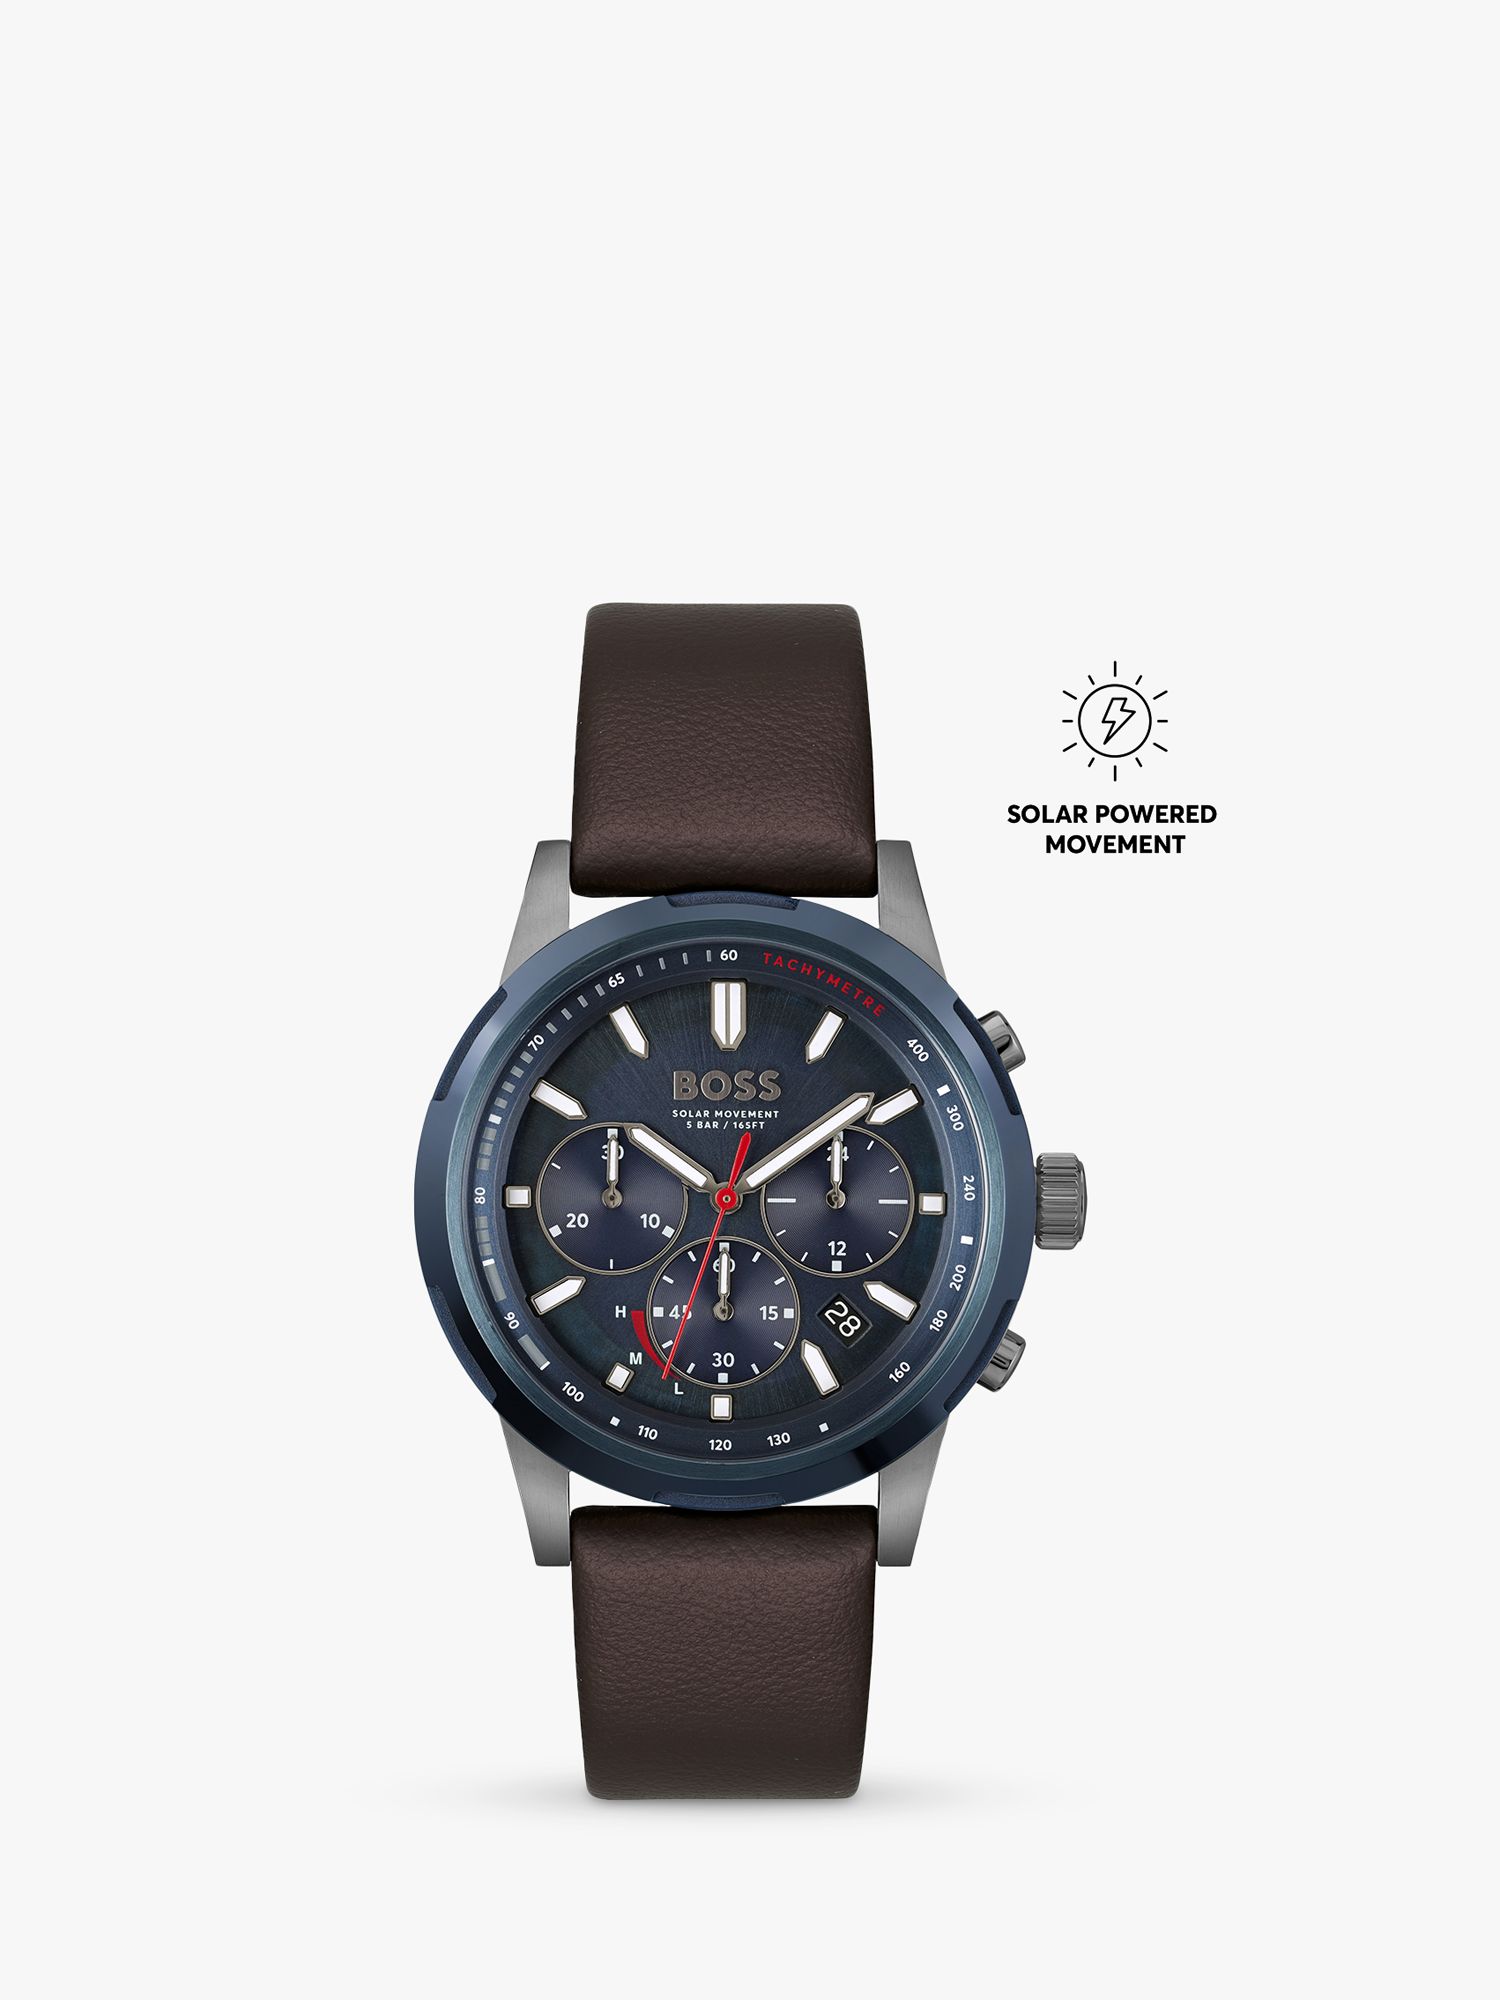 Buy BOSS Men's Solgrade Chronograph Leather Strap Watch, Brown/Blue 1514030 Online at johnlewis.com